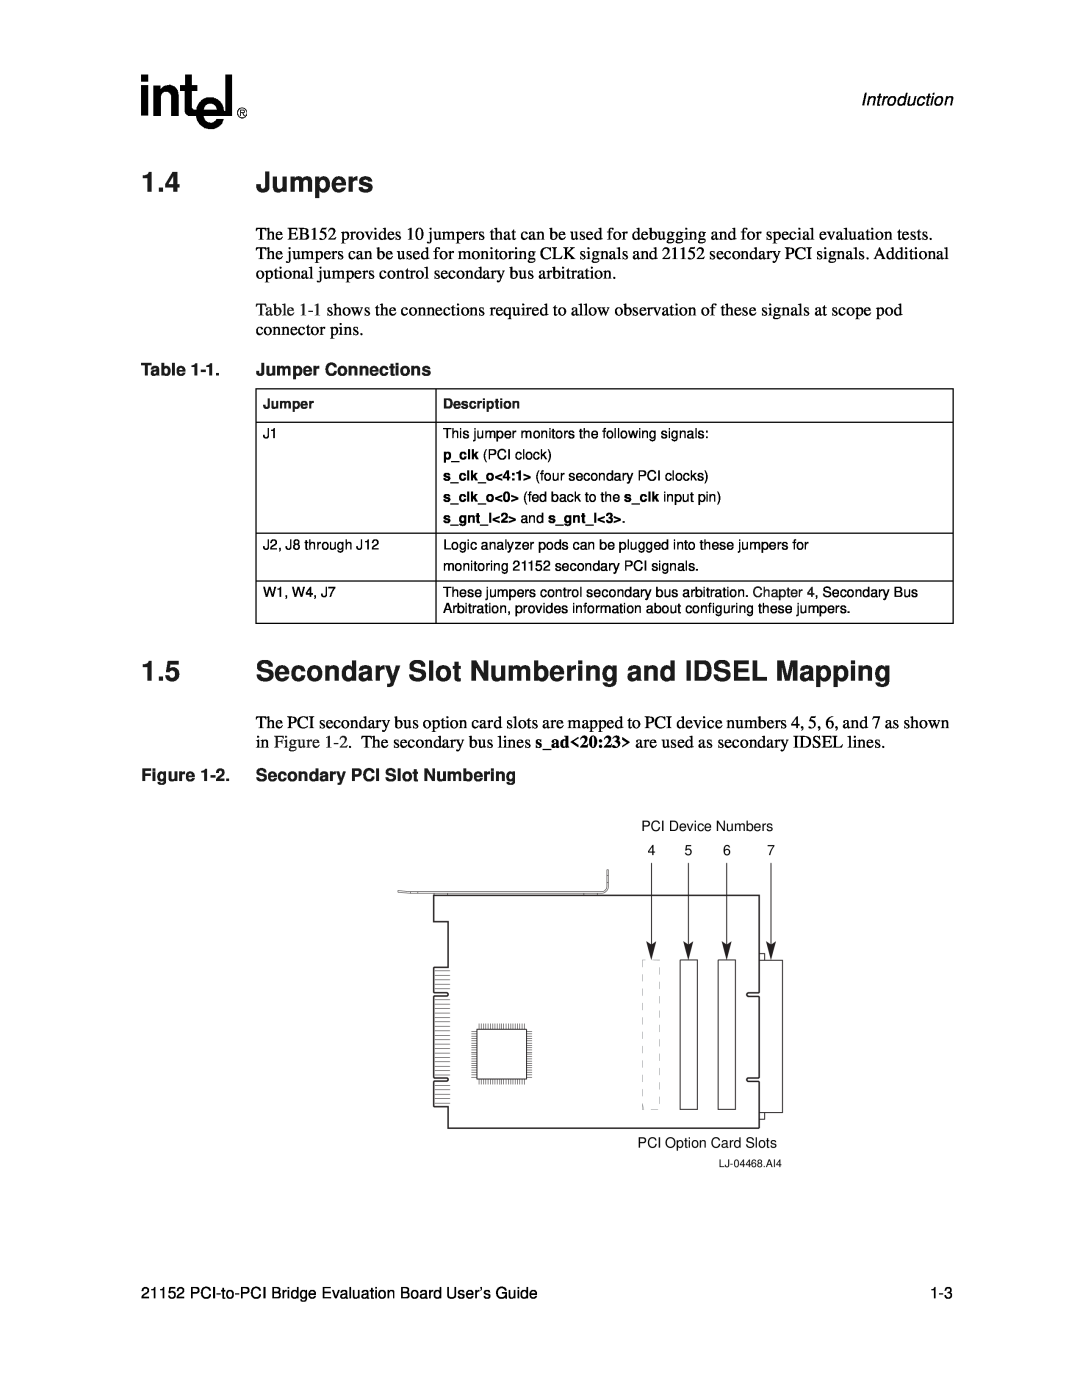 Intel 21152 manual Jumpers, Secondary Slot Numbering and IDSEL Mapping, Jumper Connections, 2. Secondary PCI Slot Numbering 